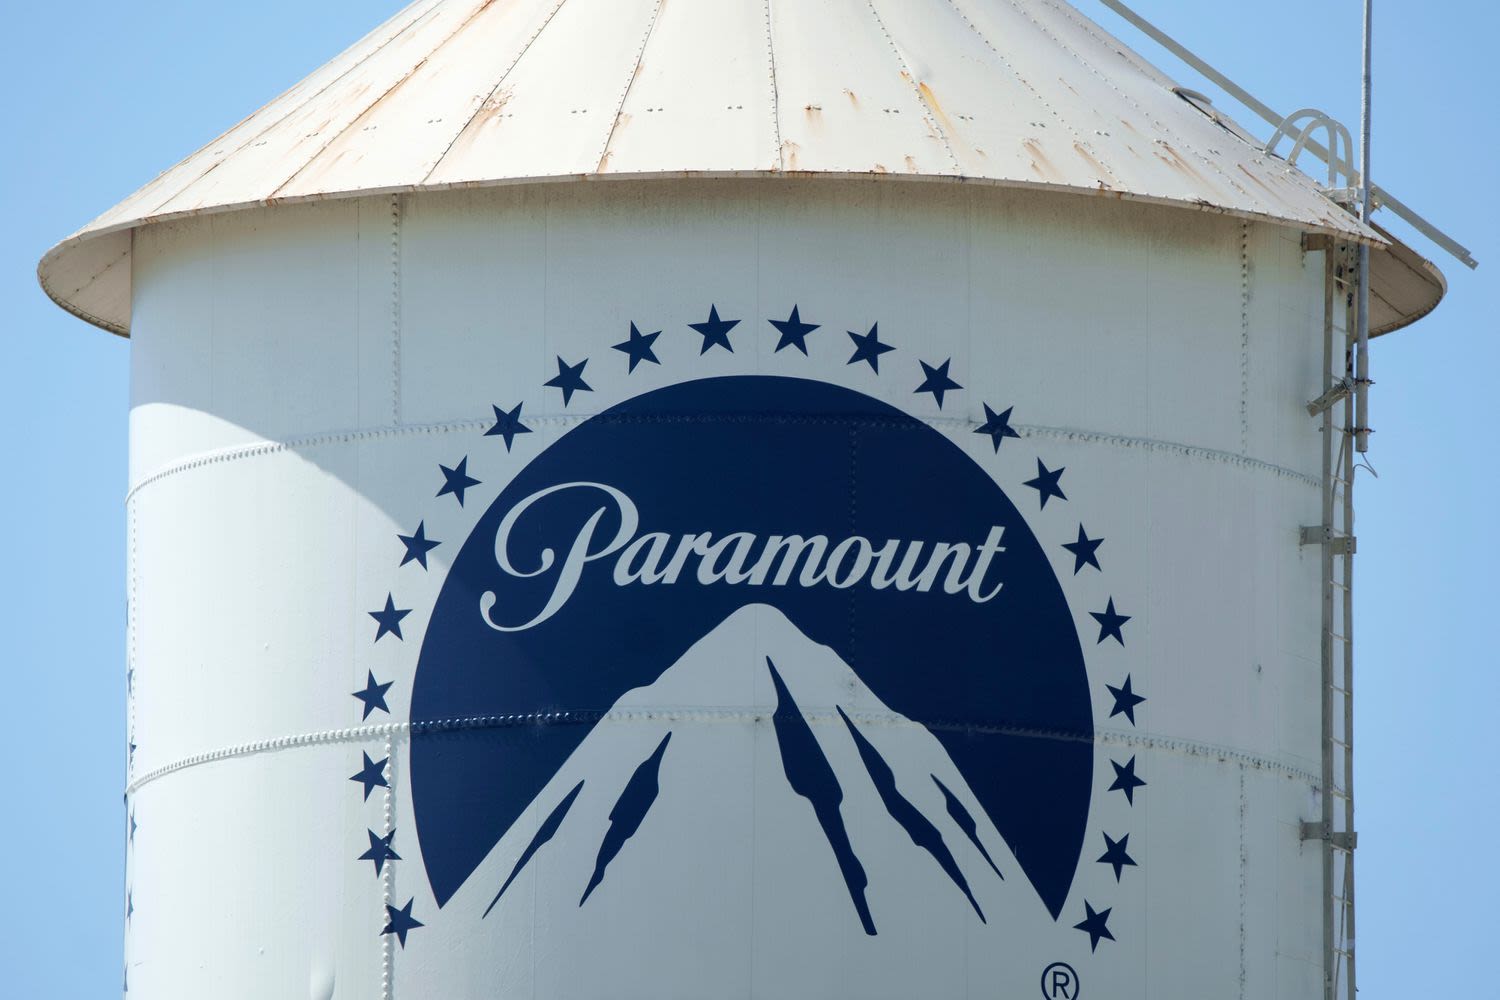 Paramount Stock Advances on Report of Skydance Media Deal